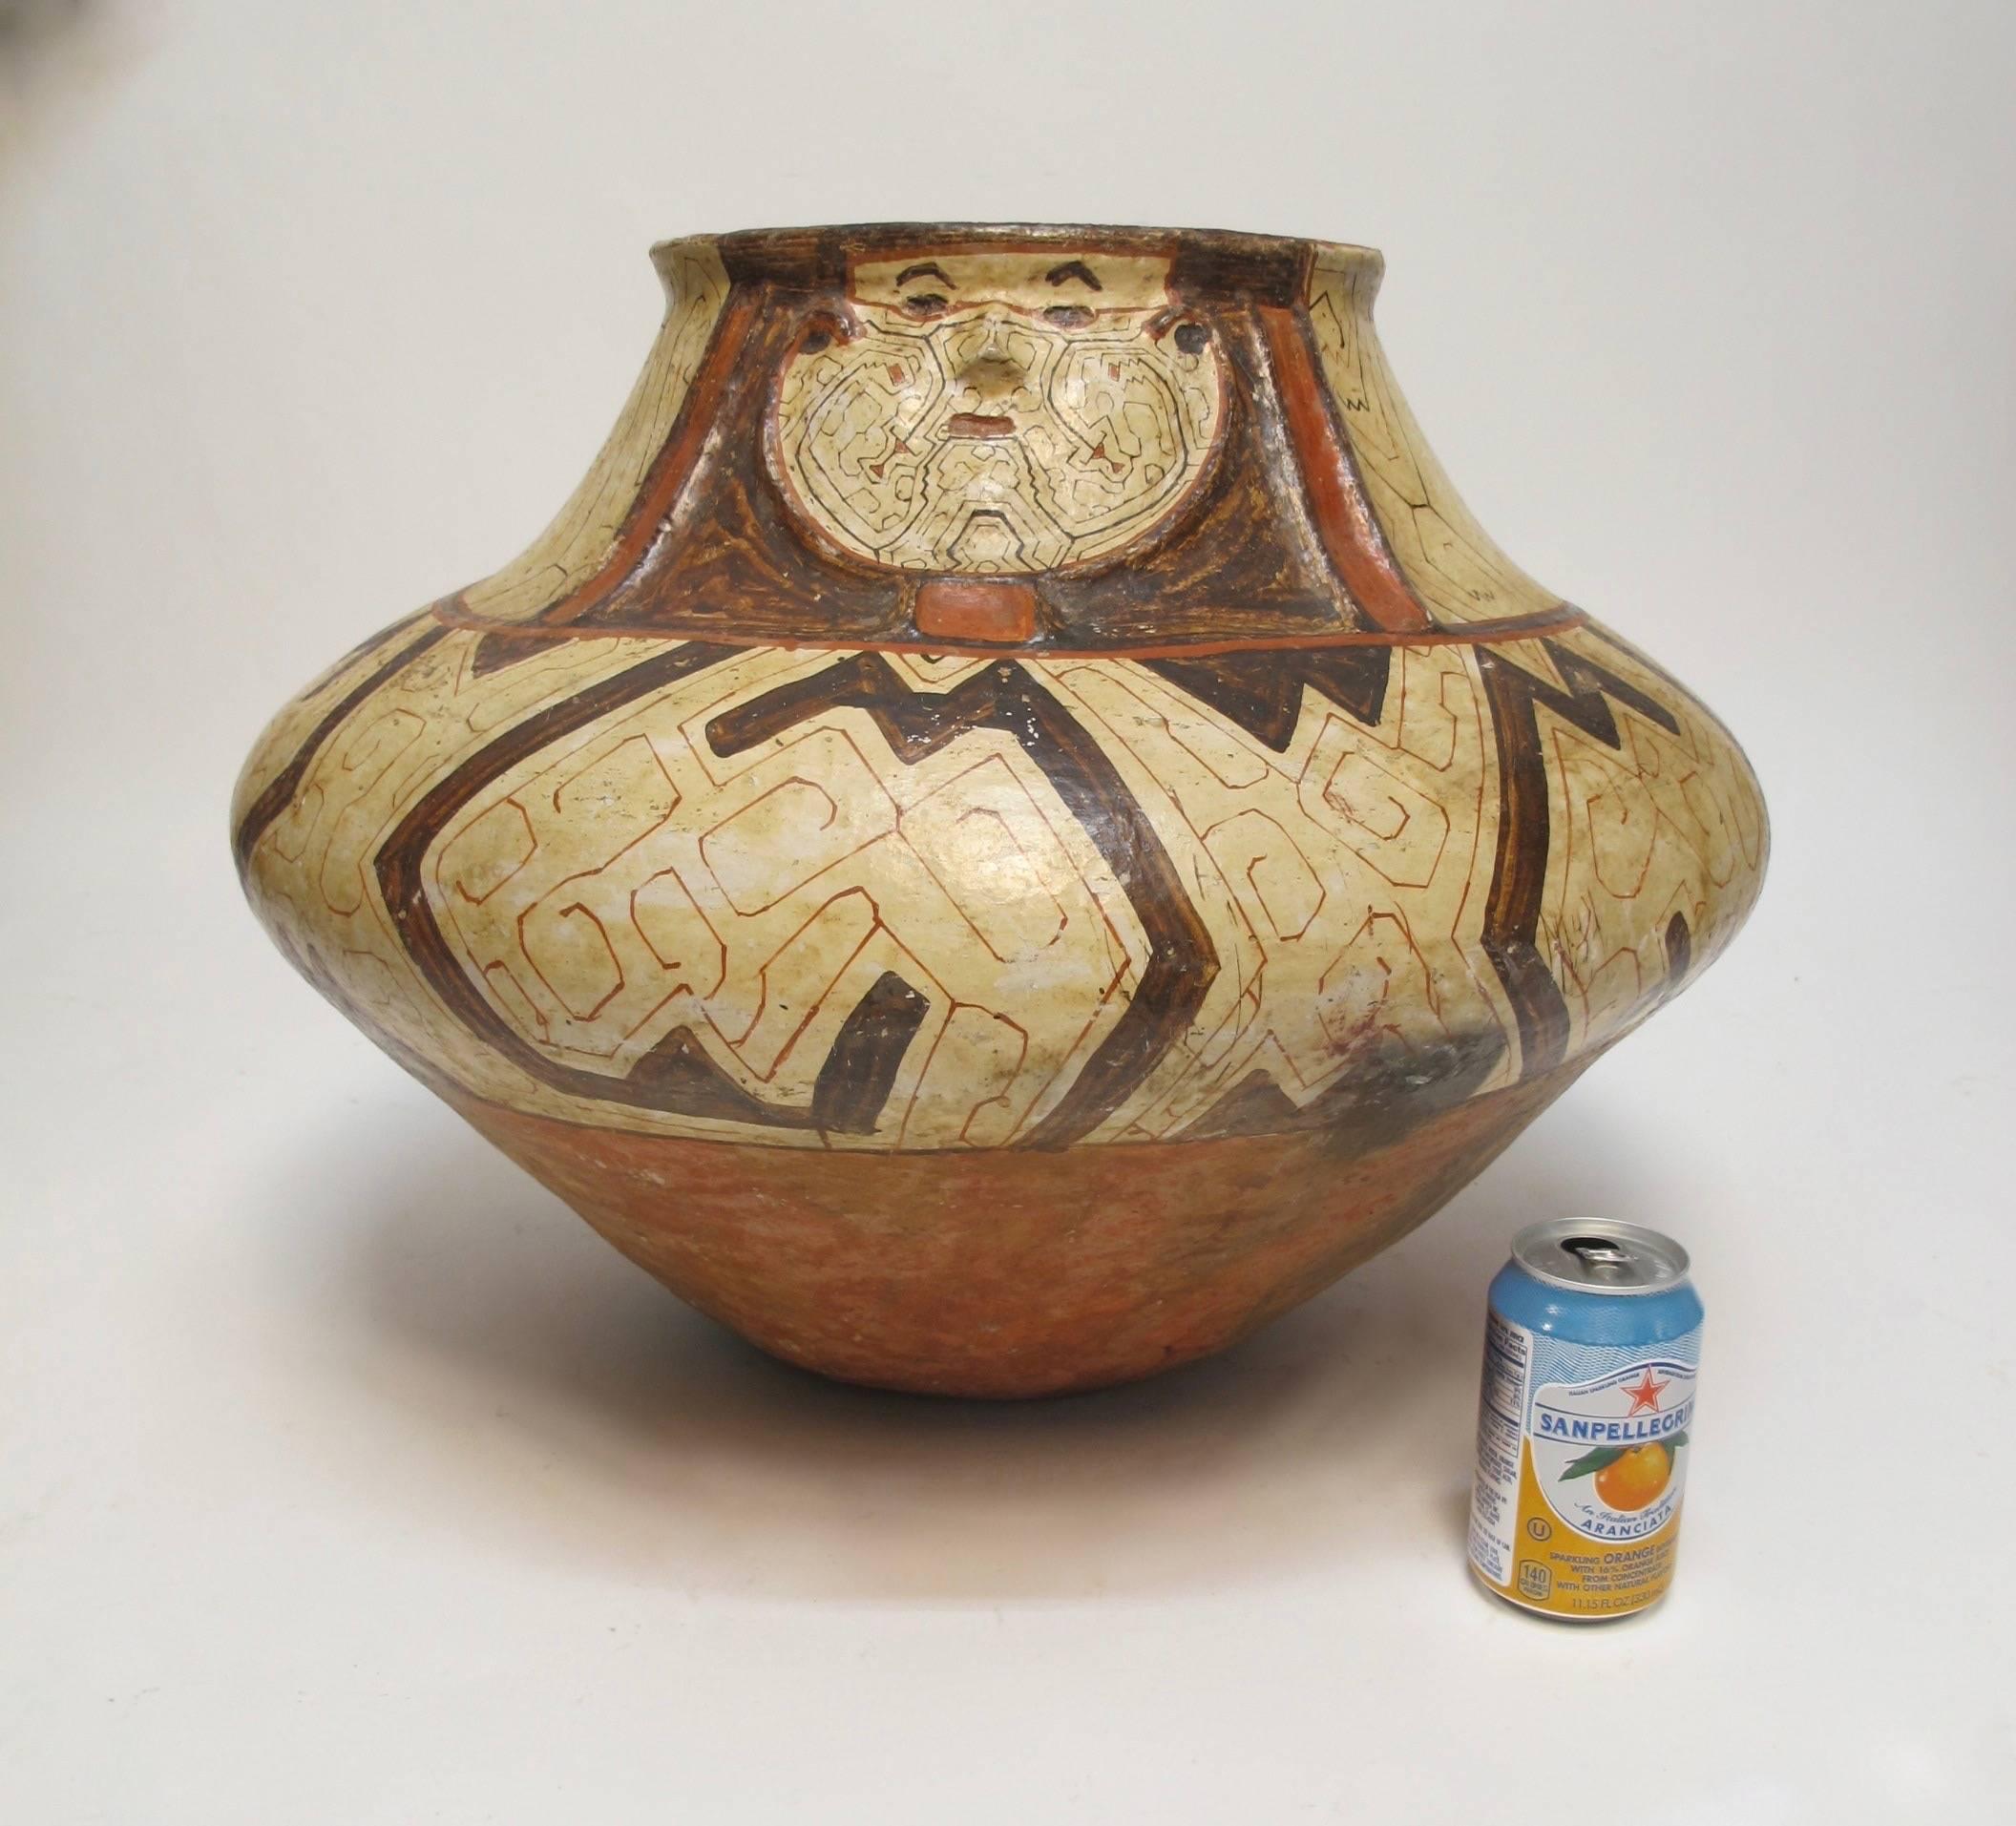 An older and unusually large polychrome Shipibo pottery urn or vessel. Nicely sculpted face at neck with a well rounded body. General staining consistent with age and tribal use, Peru, early to mid-20th century.

Although not dating to